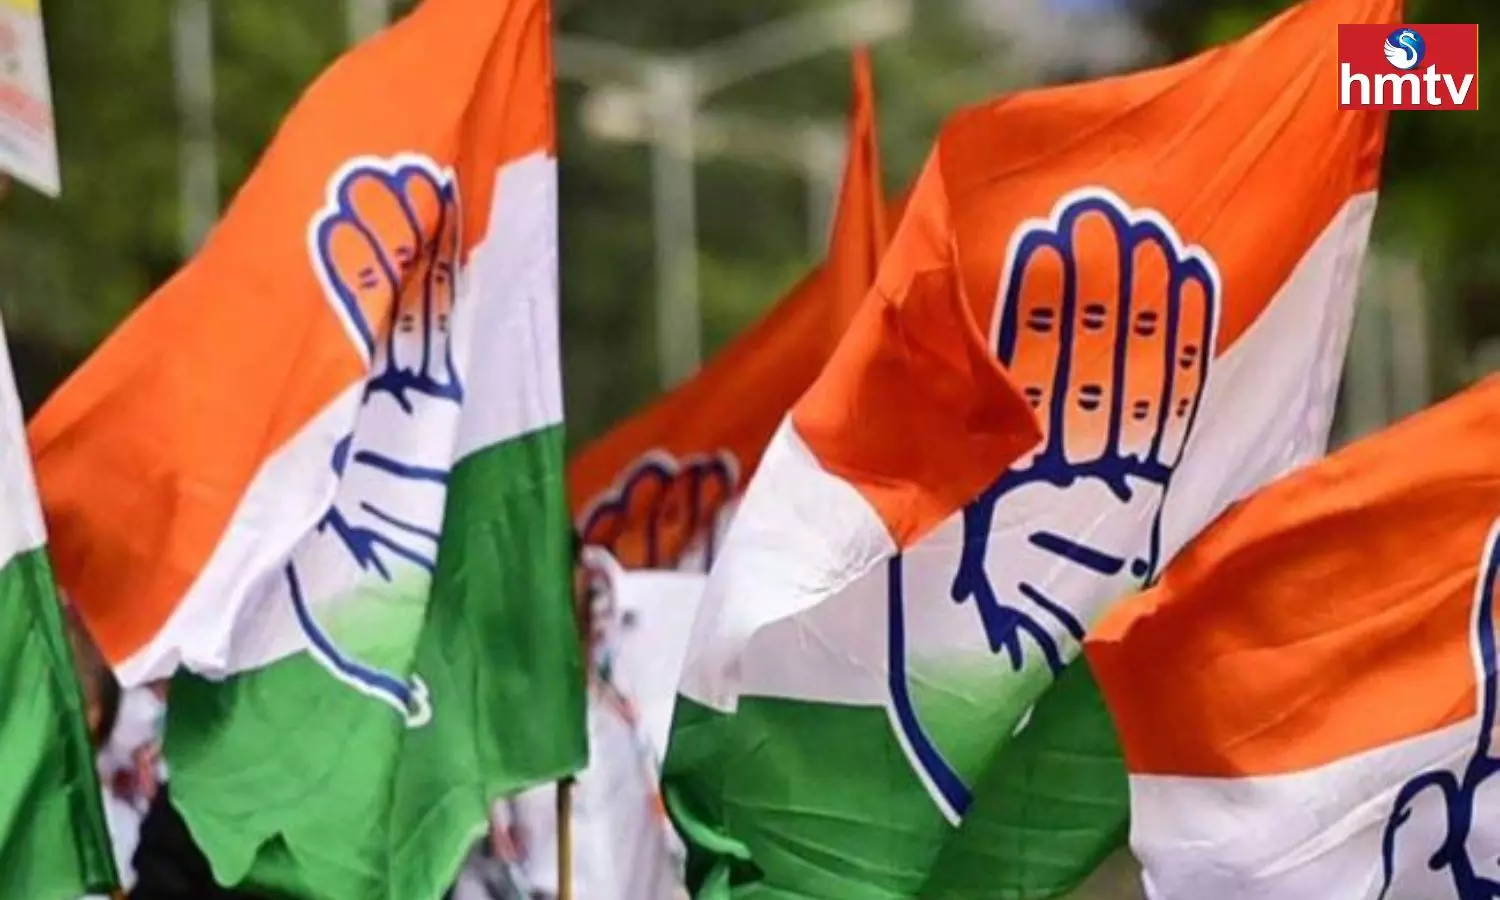 Congress Central Election Committee Meet again today